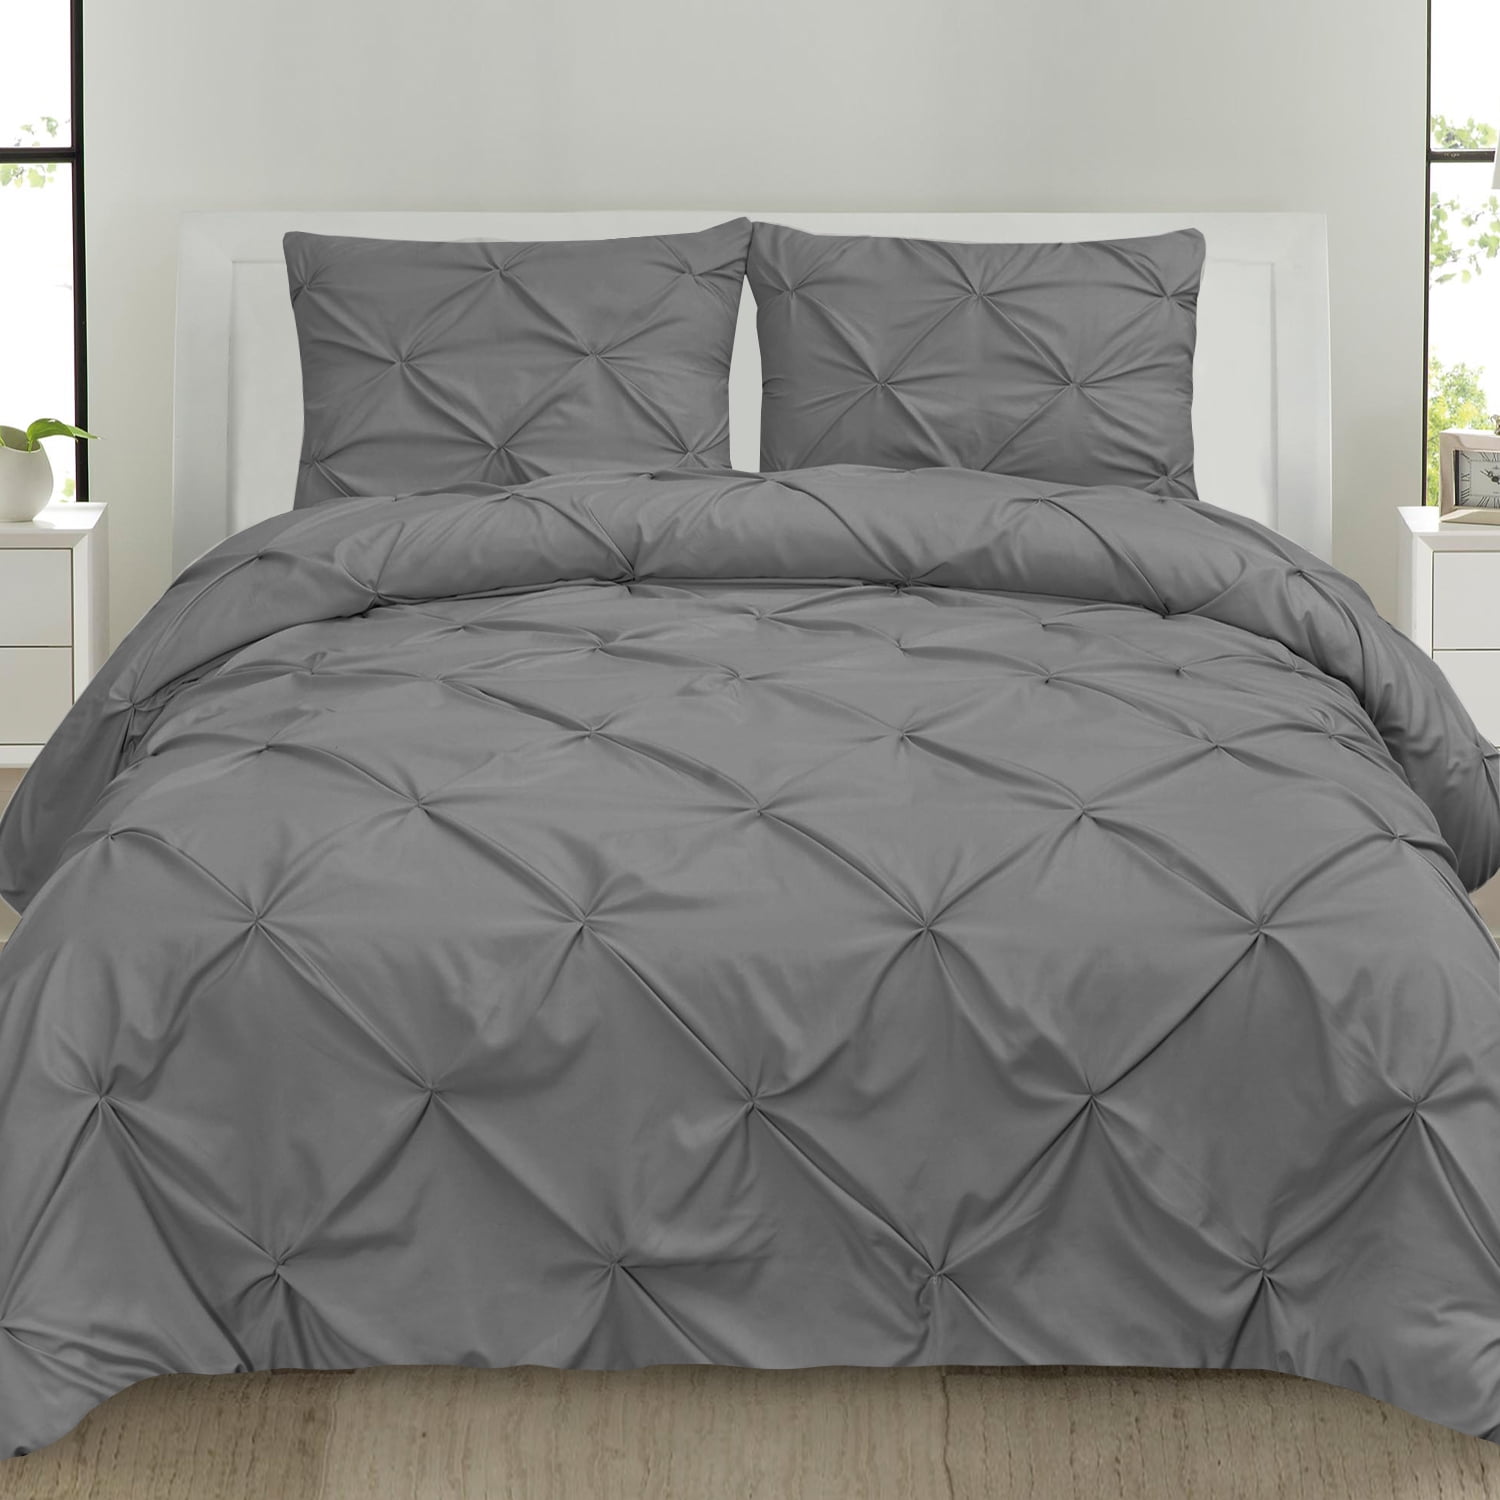 Pintuck Pinch Pleated Duvet Cover Bedding Set & Pillowcase Single Double King 